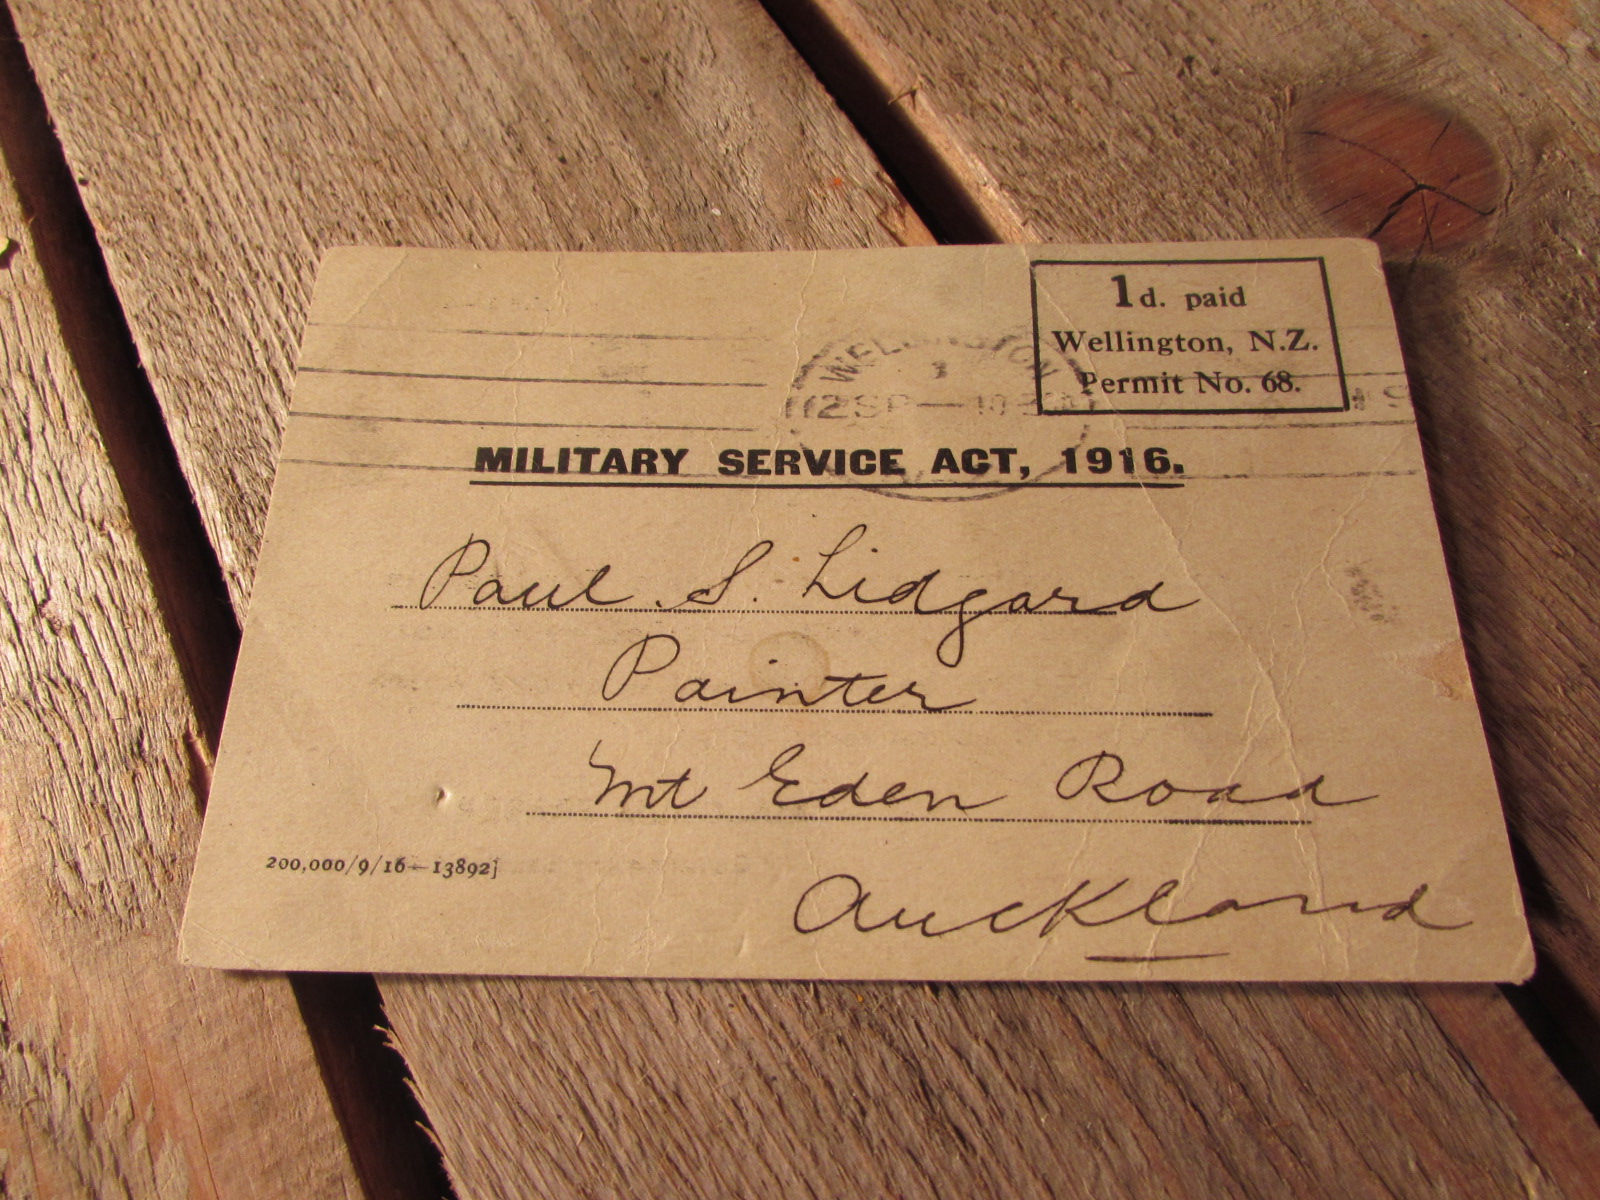 Military service act card 1916. New Zealand expeditionary force reserve.